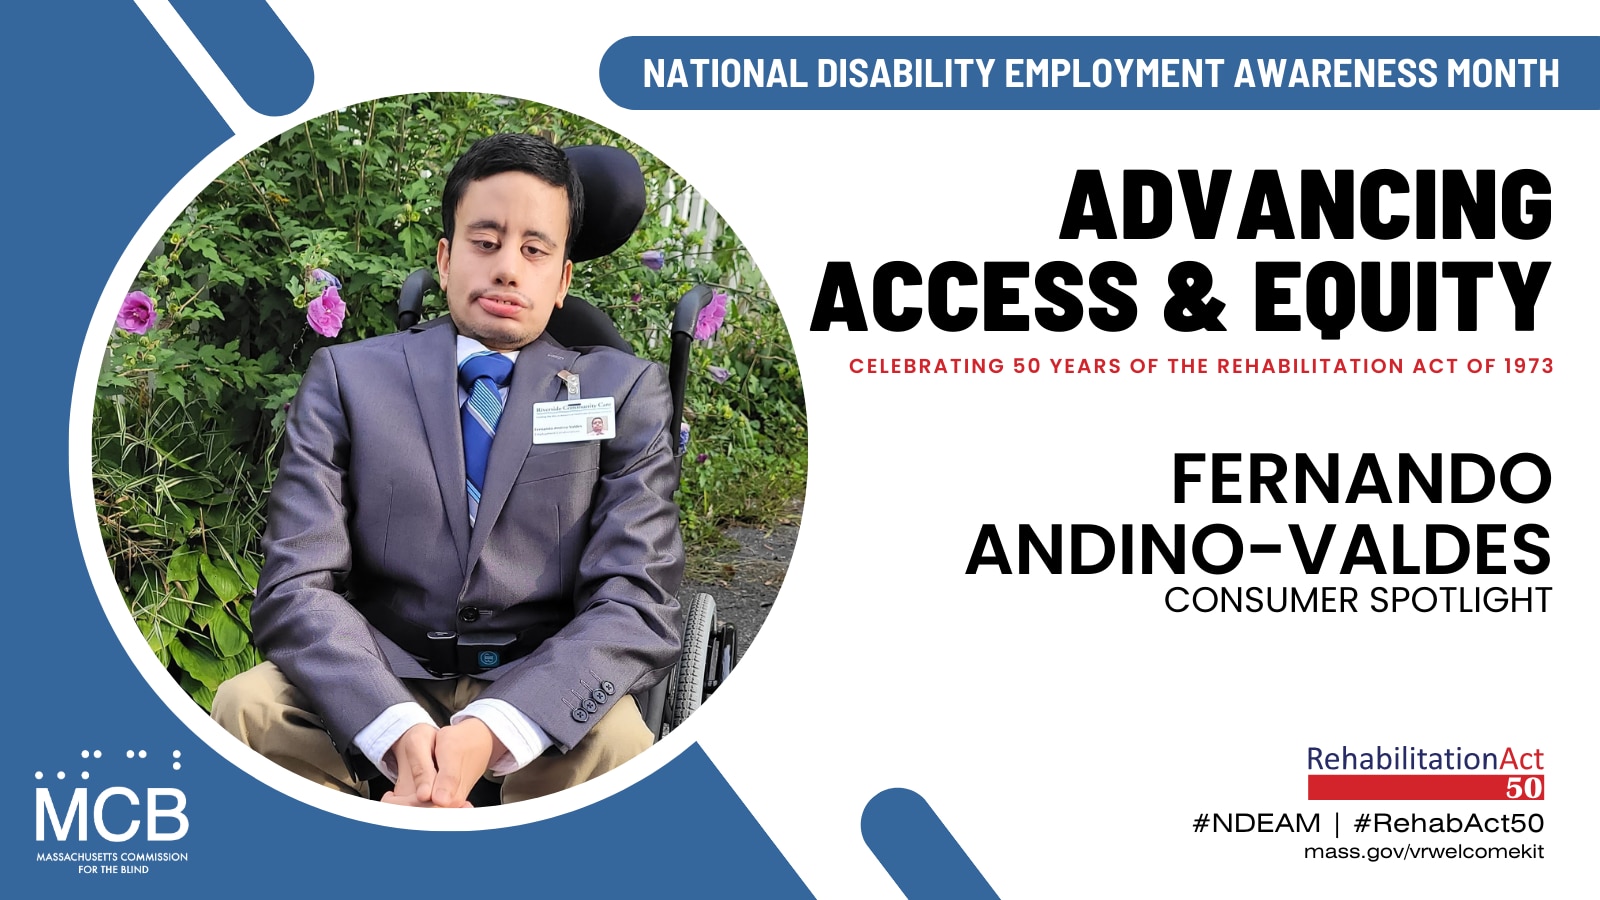 A photo of Fernando Andino-Valdes and the MCB logo with the text: National Disability Employment Awareness Month, Advancing Access & Equity, Celebrating 50 Years of The Rehabilitation Act of 1973, #NDEAM, #RehabAct50, mass.gov/vrwelcomekit